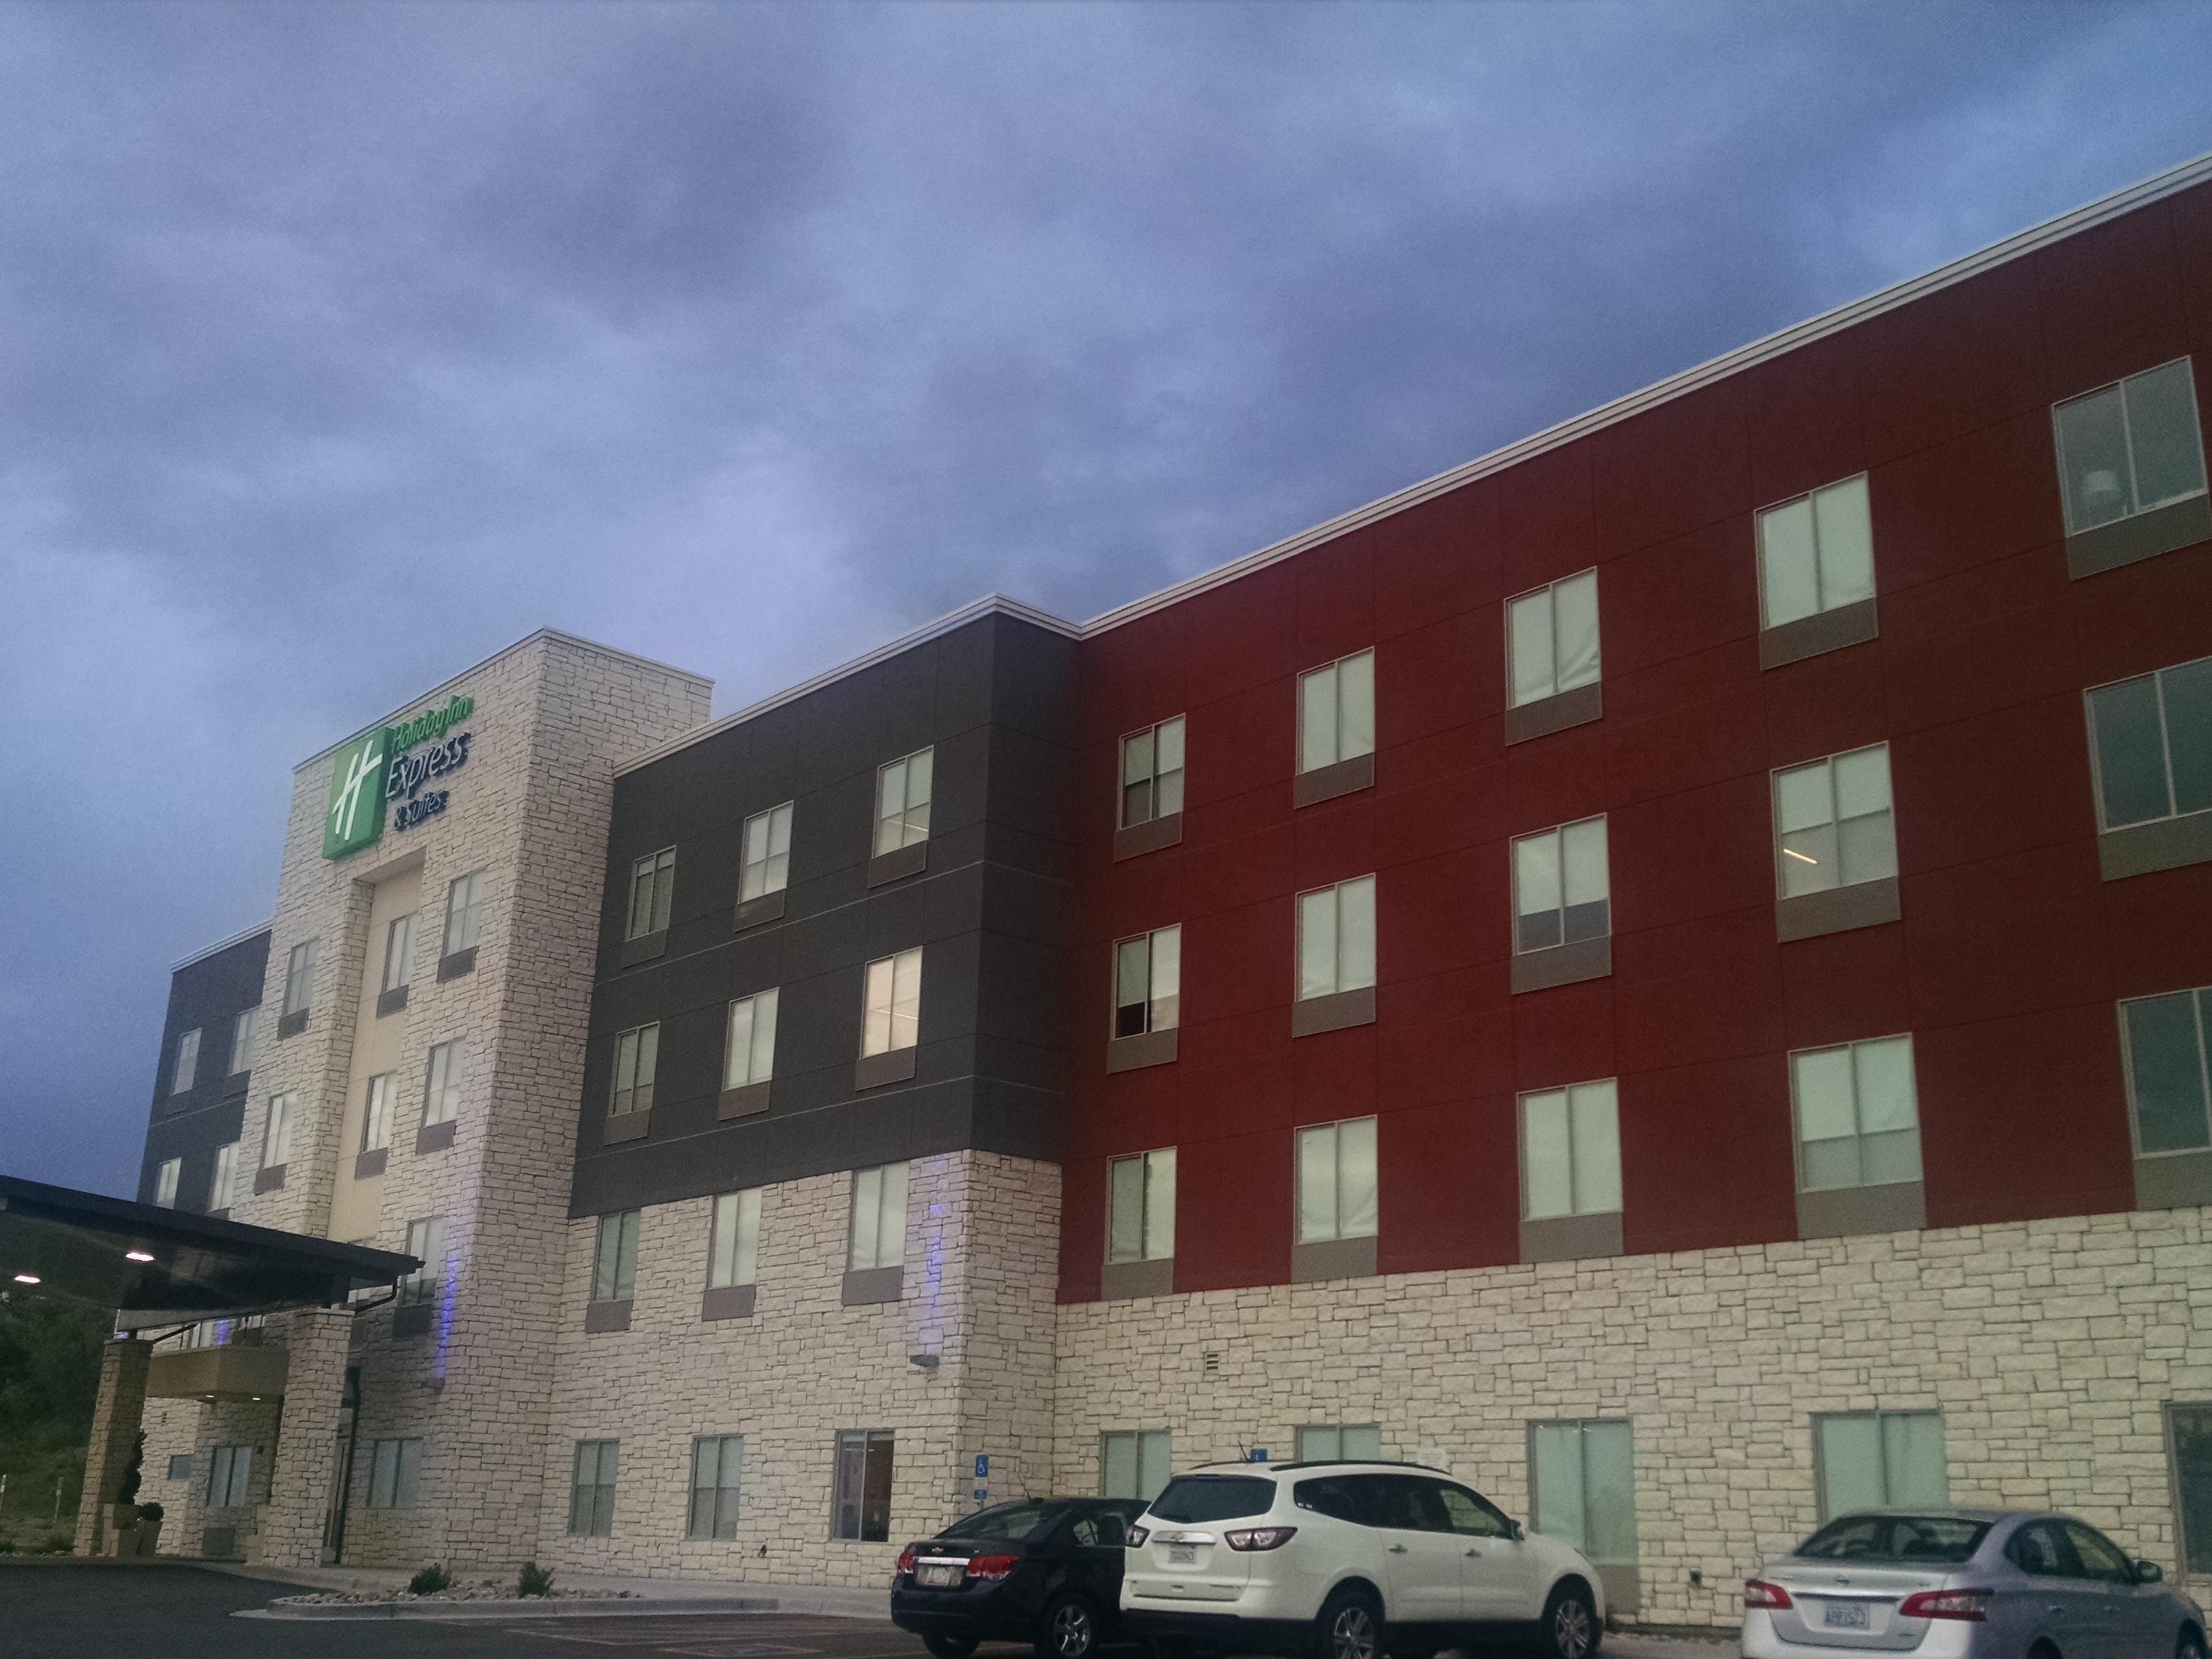 Holiday Inn Express And Suites Price 4084858012 4x3